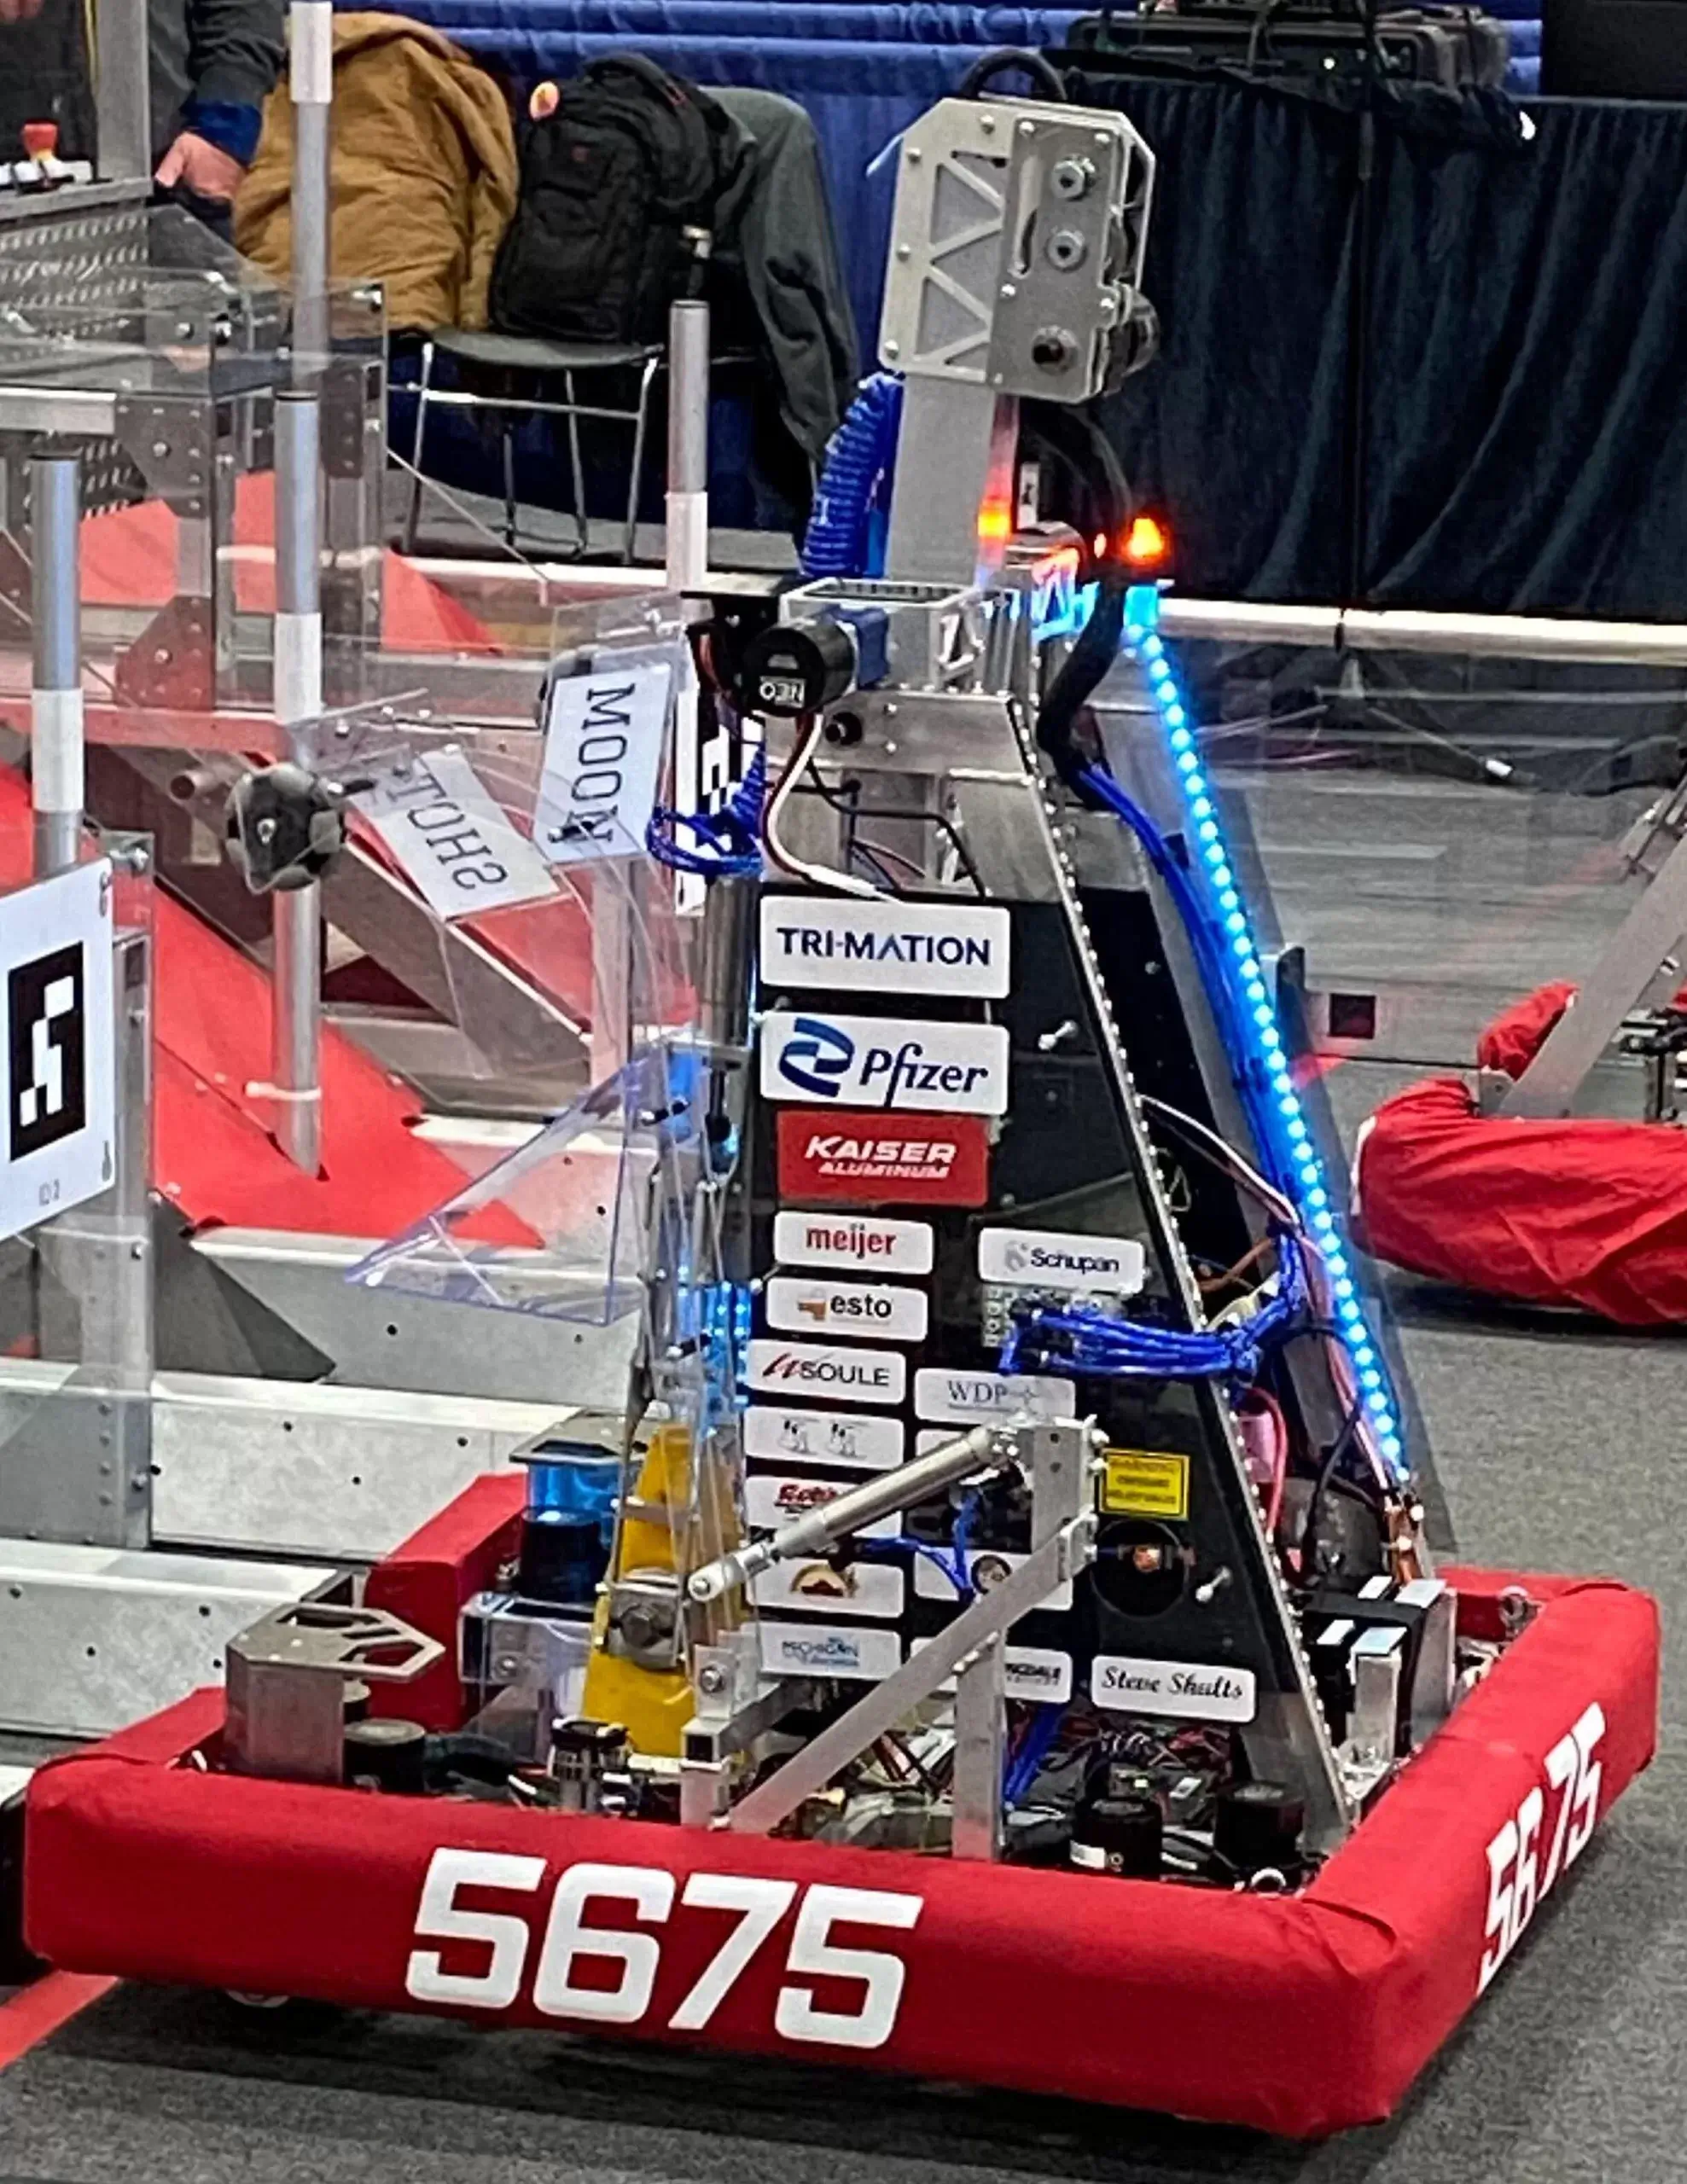 The Mattawan Wiredcats First Robotics Competition team 5675. Moonshot 2023 for First Charged up